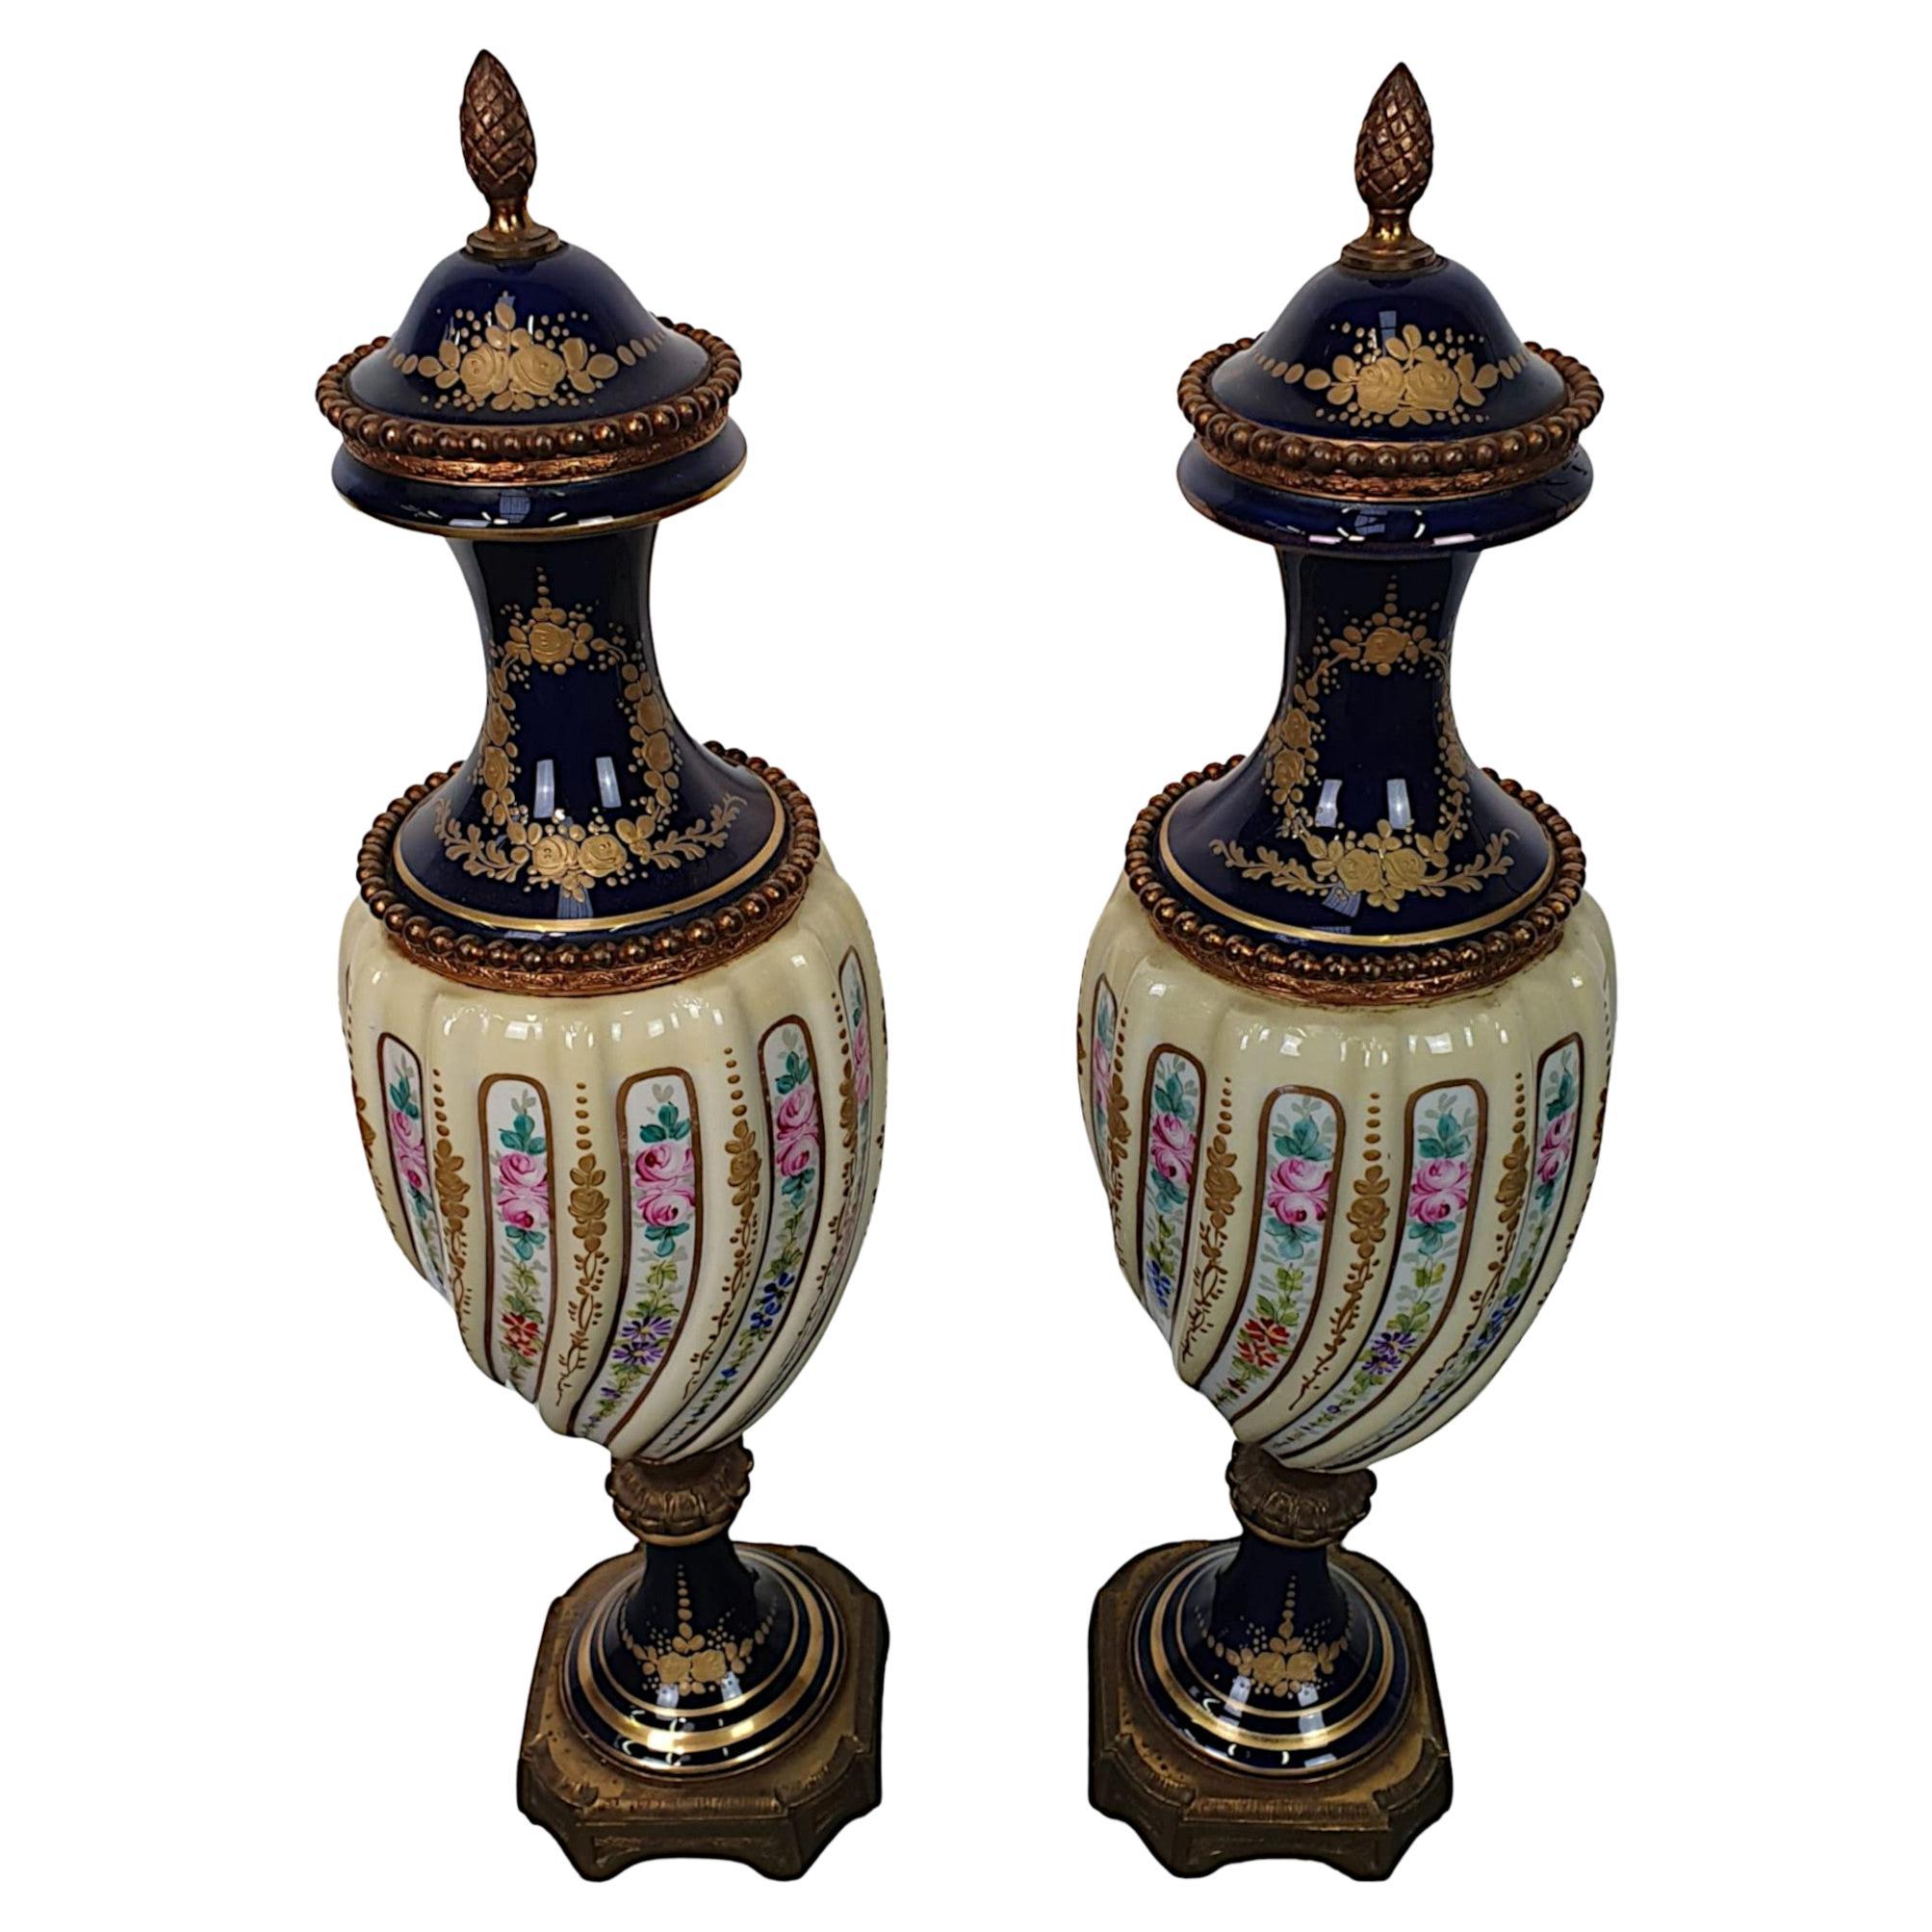 Lovely Quality Pair of 19th Century Urns in the Manner of Sèvres For Sale